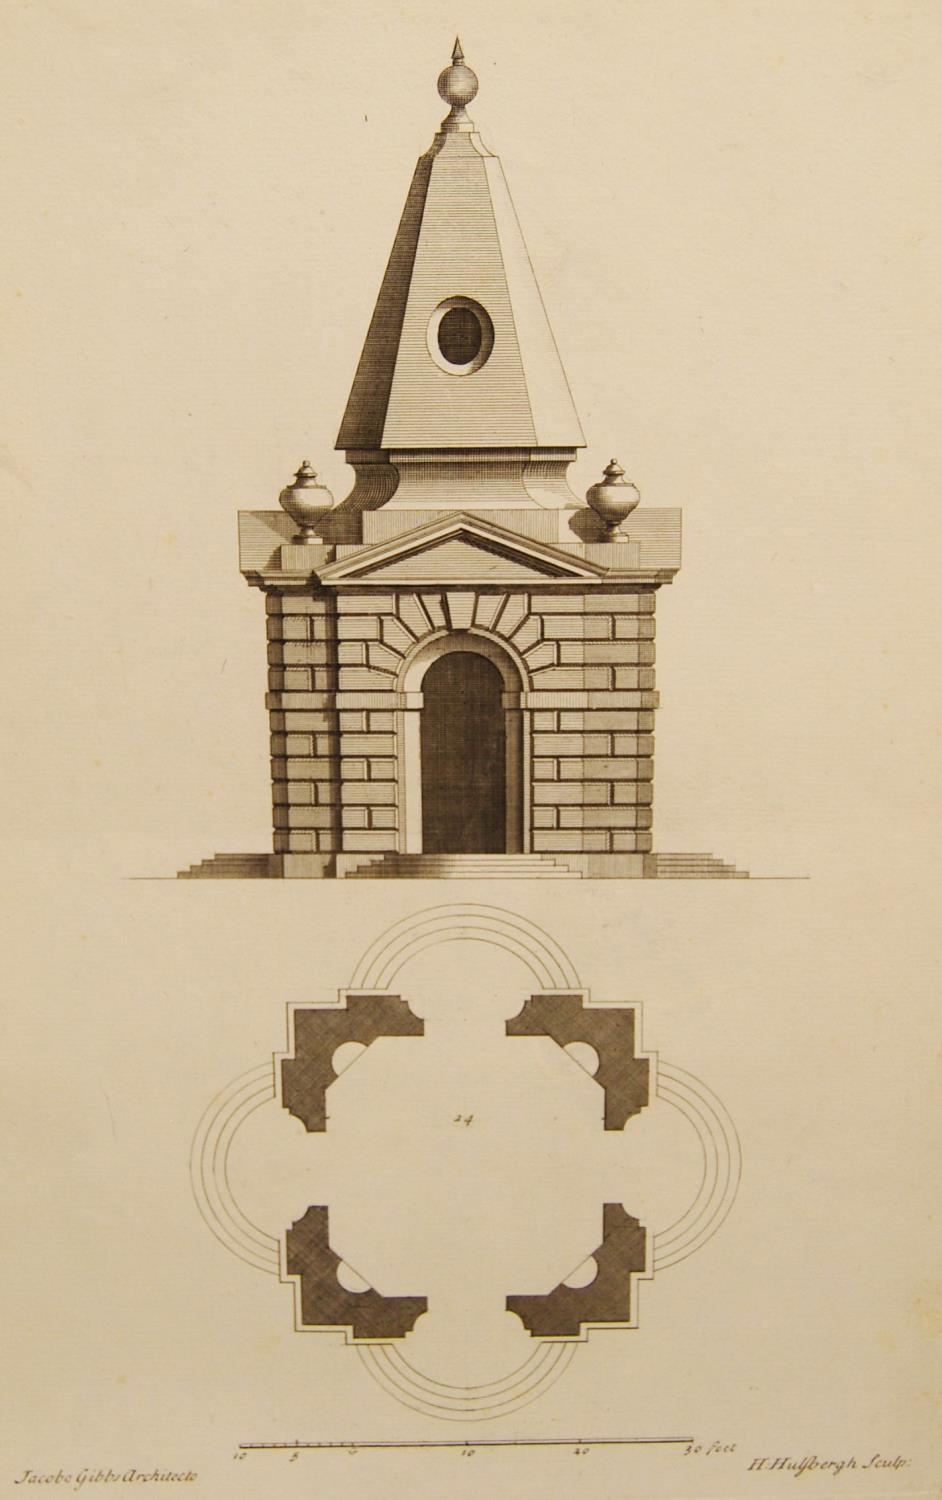 Assorted etchings, aquatints and prints including James Gibbs, architectural designs etc. - Image 7 of 9